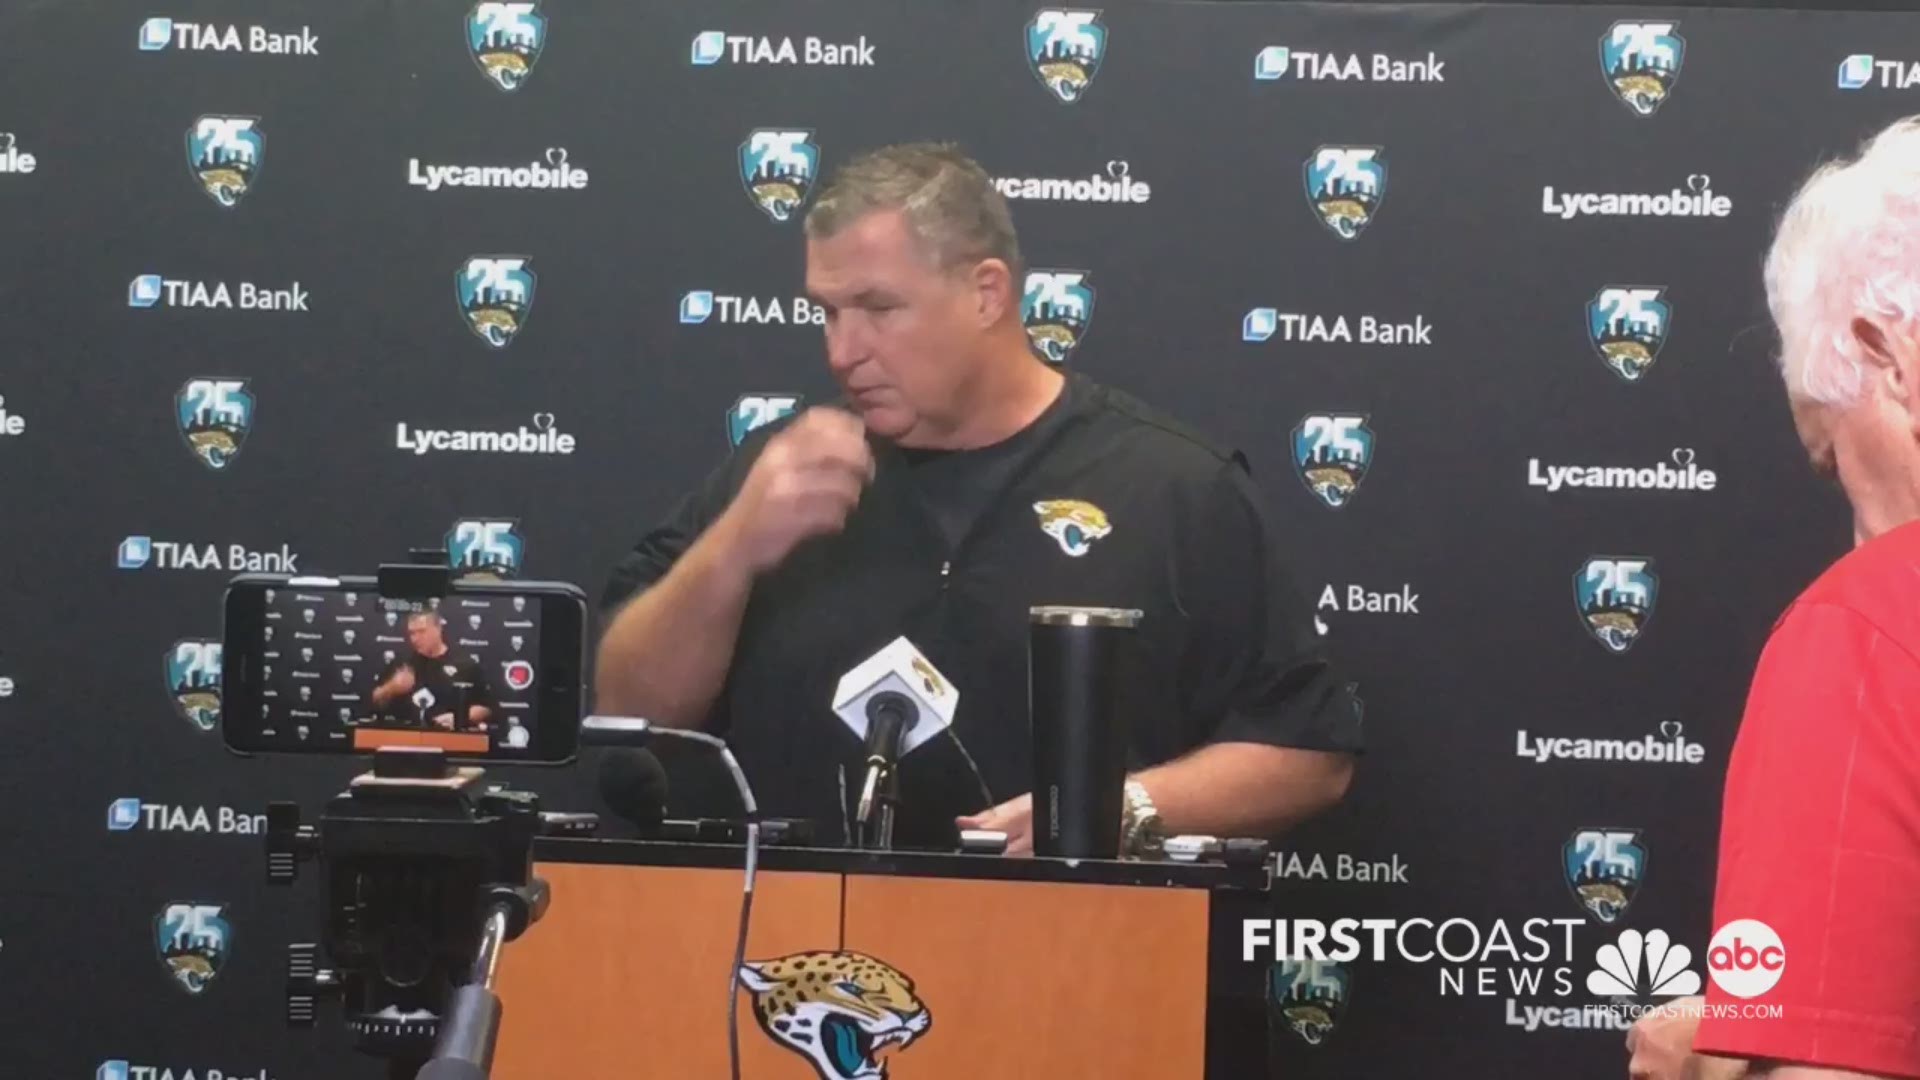 Jaguars head coach addresses the emotional challenges ahead of the 90-man roster cut on Aug. 31.